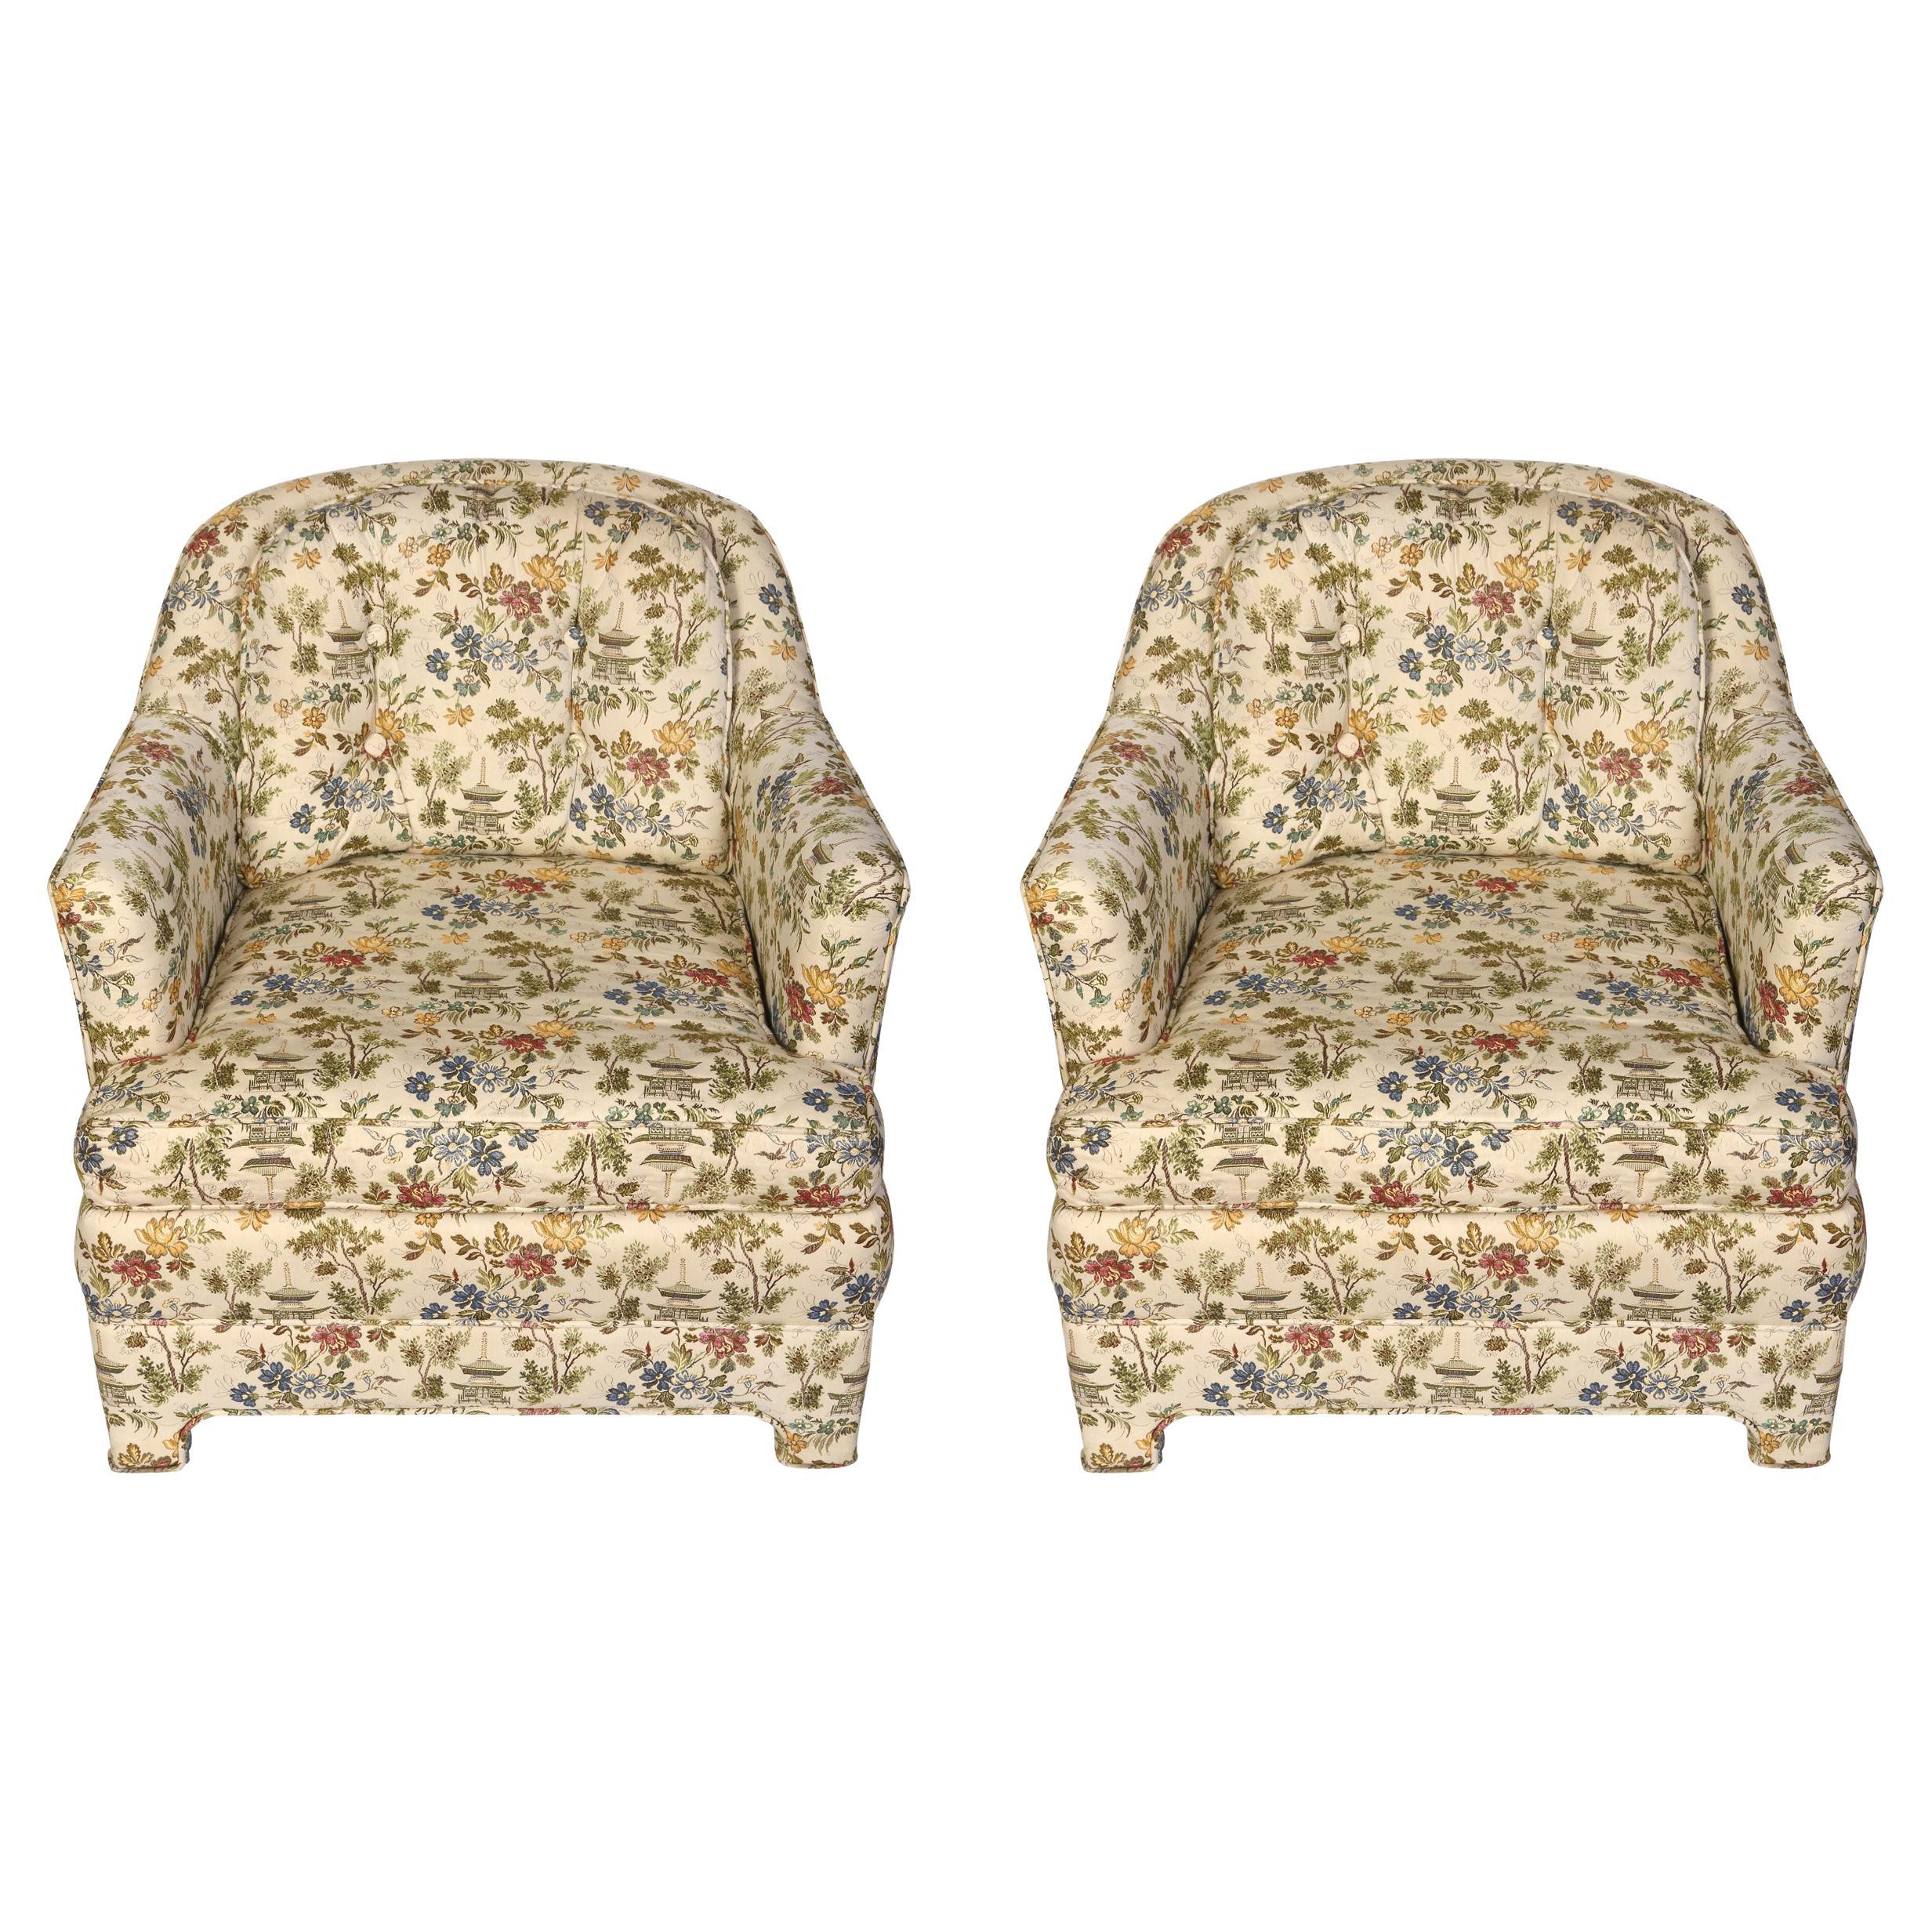 A Pair of Vintage Armchairs